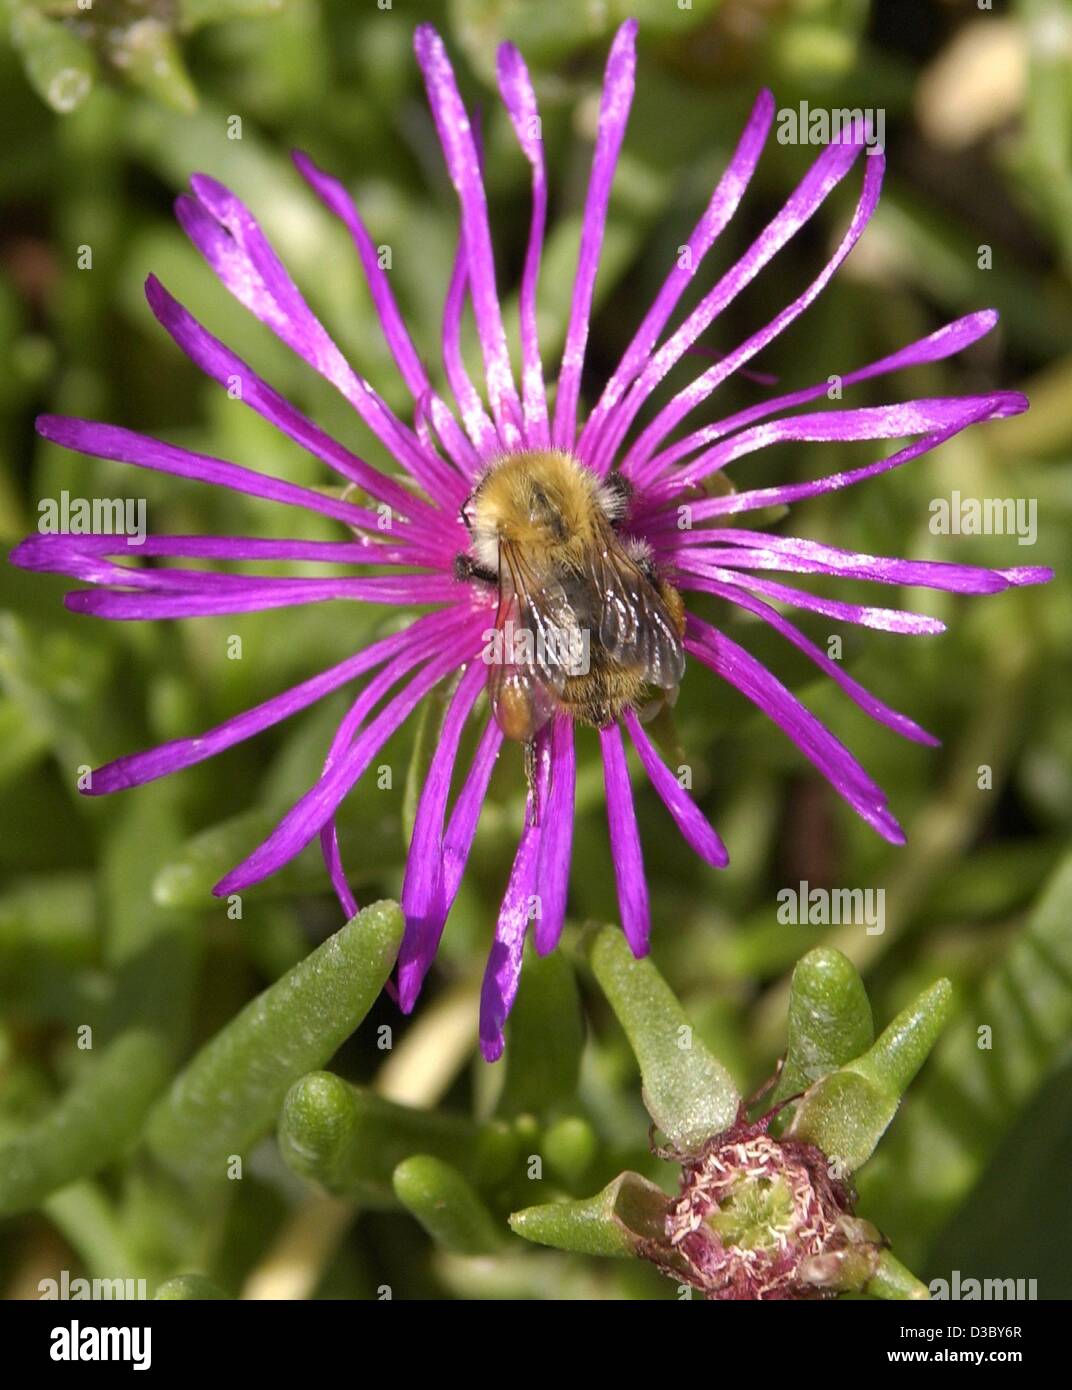 (dpa) - A bumble bee is sucking nectar from a flower in Berlin, 30 July 2003. Stock Photo